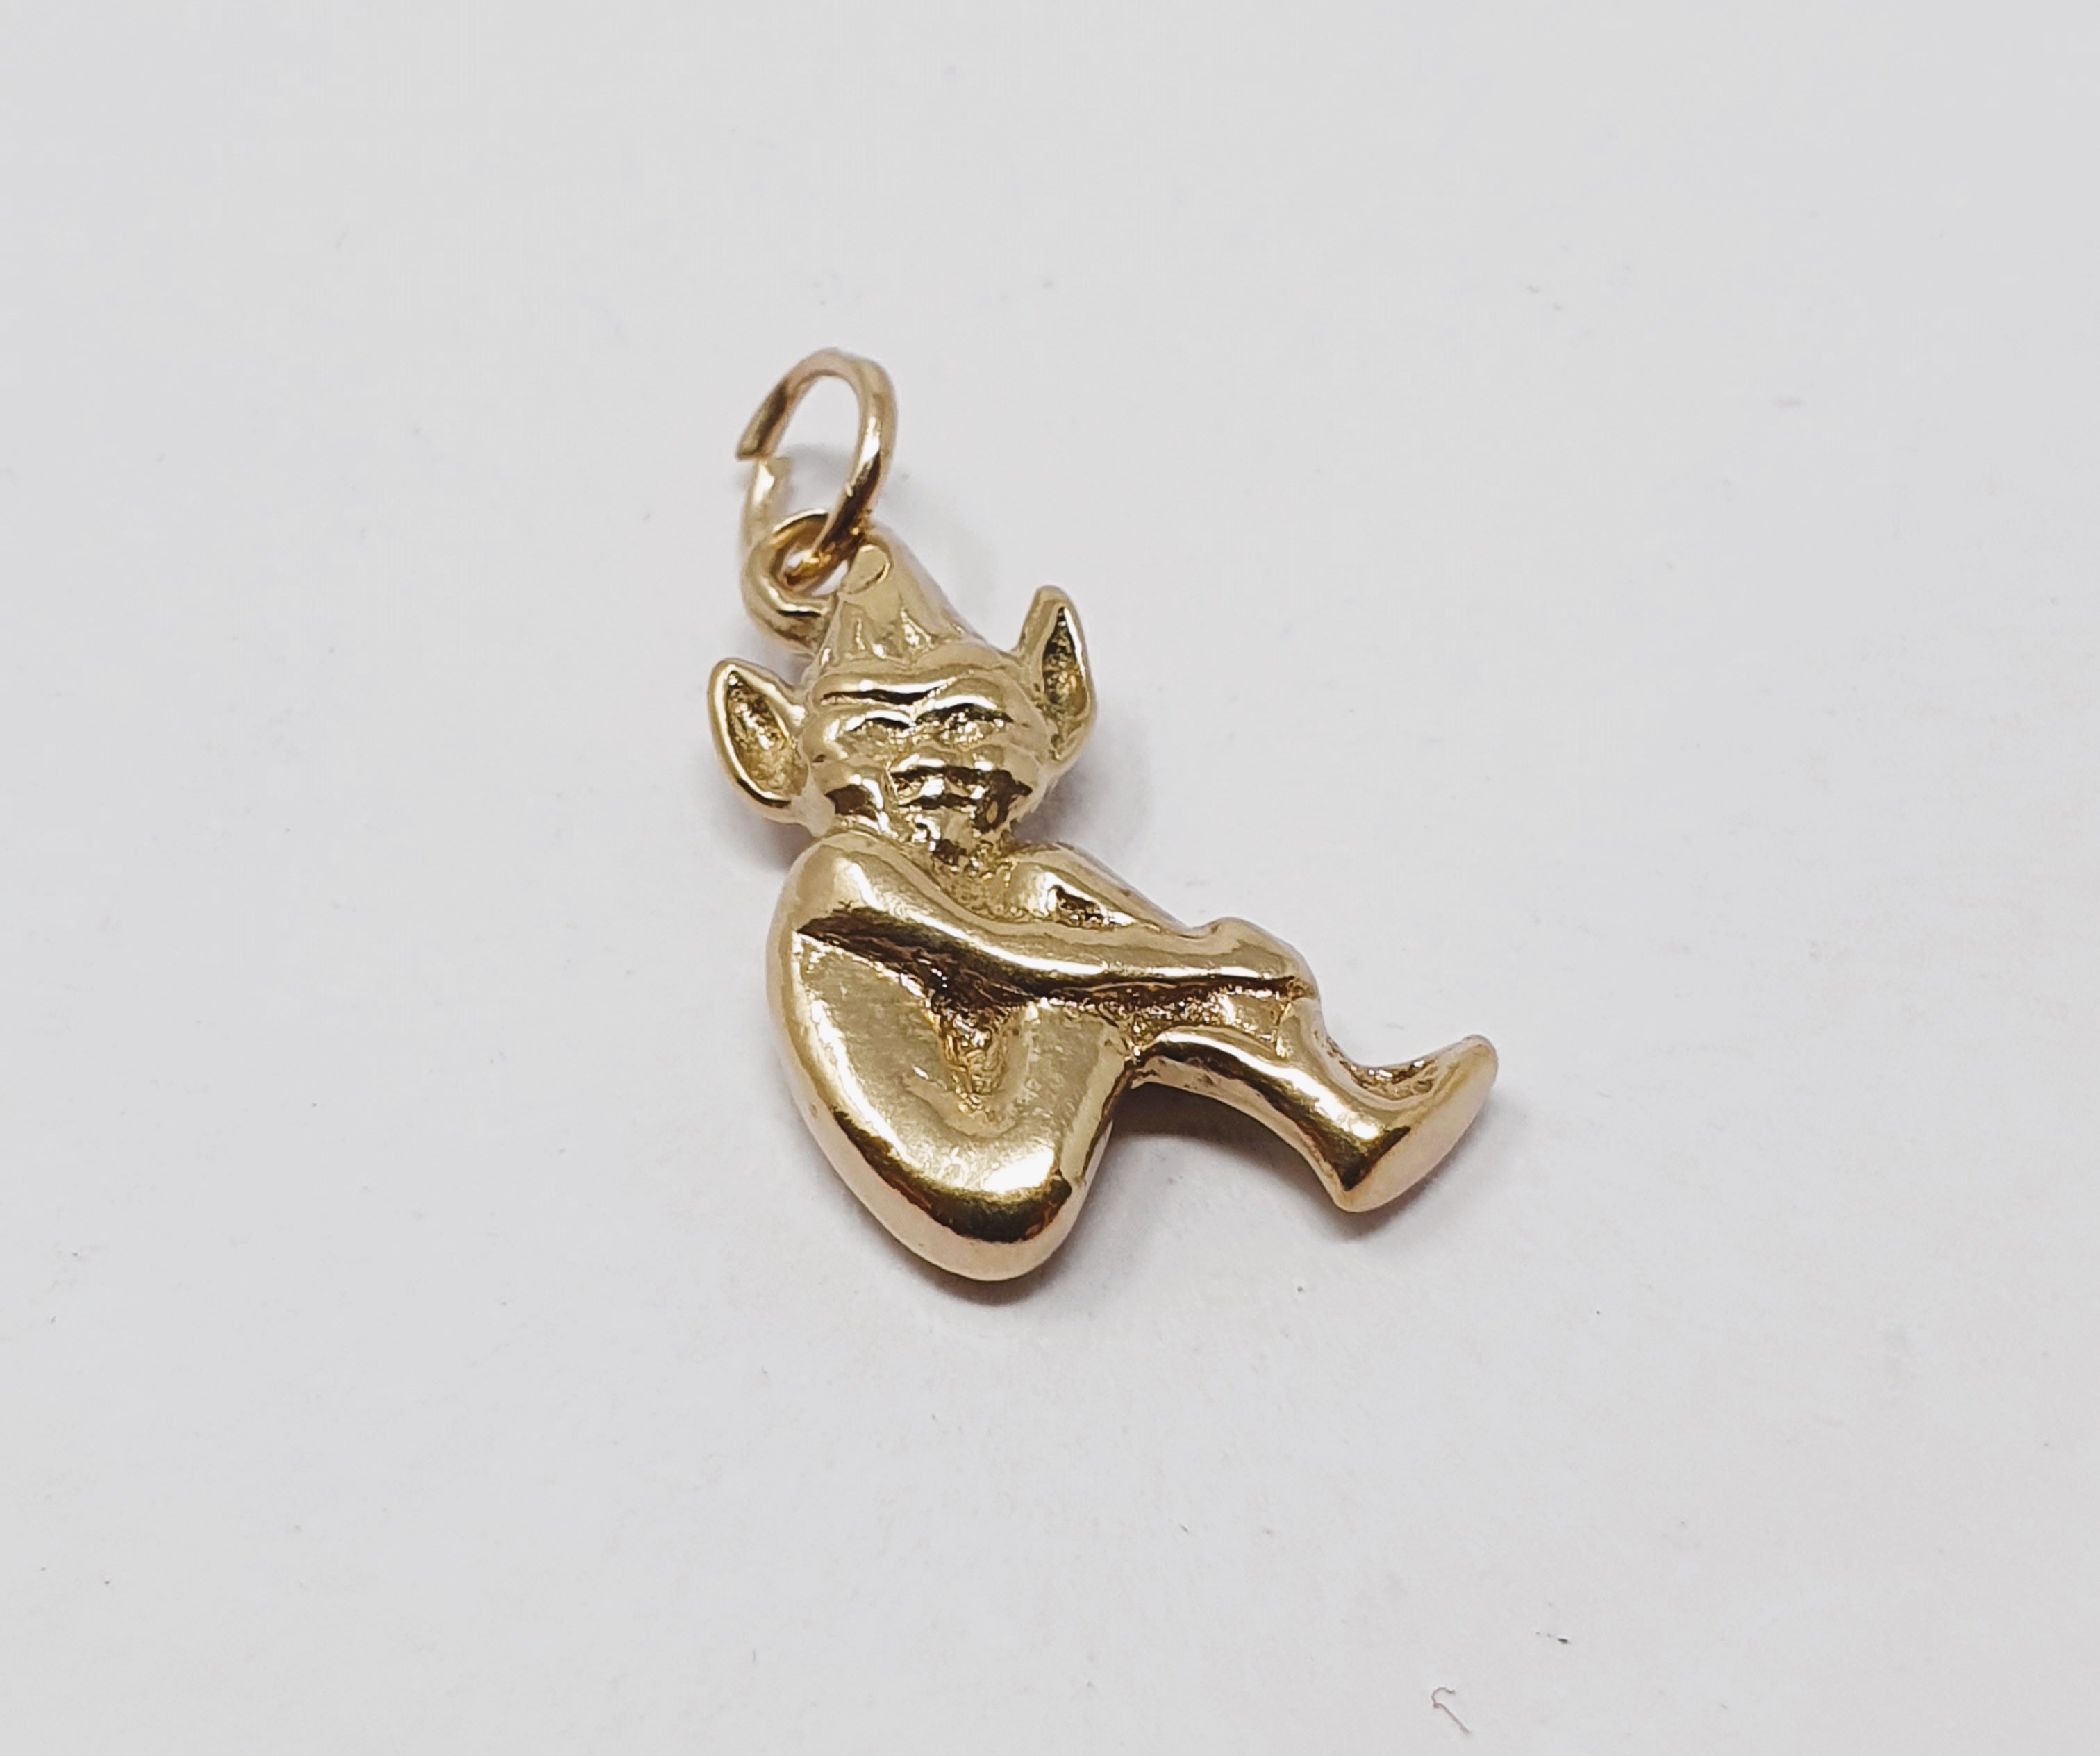 9ct gold vintage pixie charm, gross weight 3.